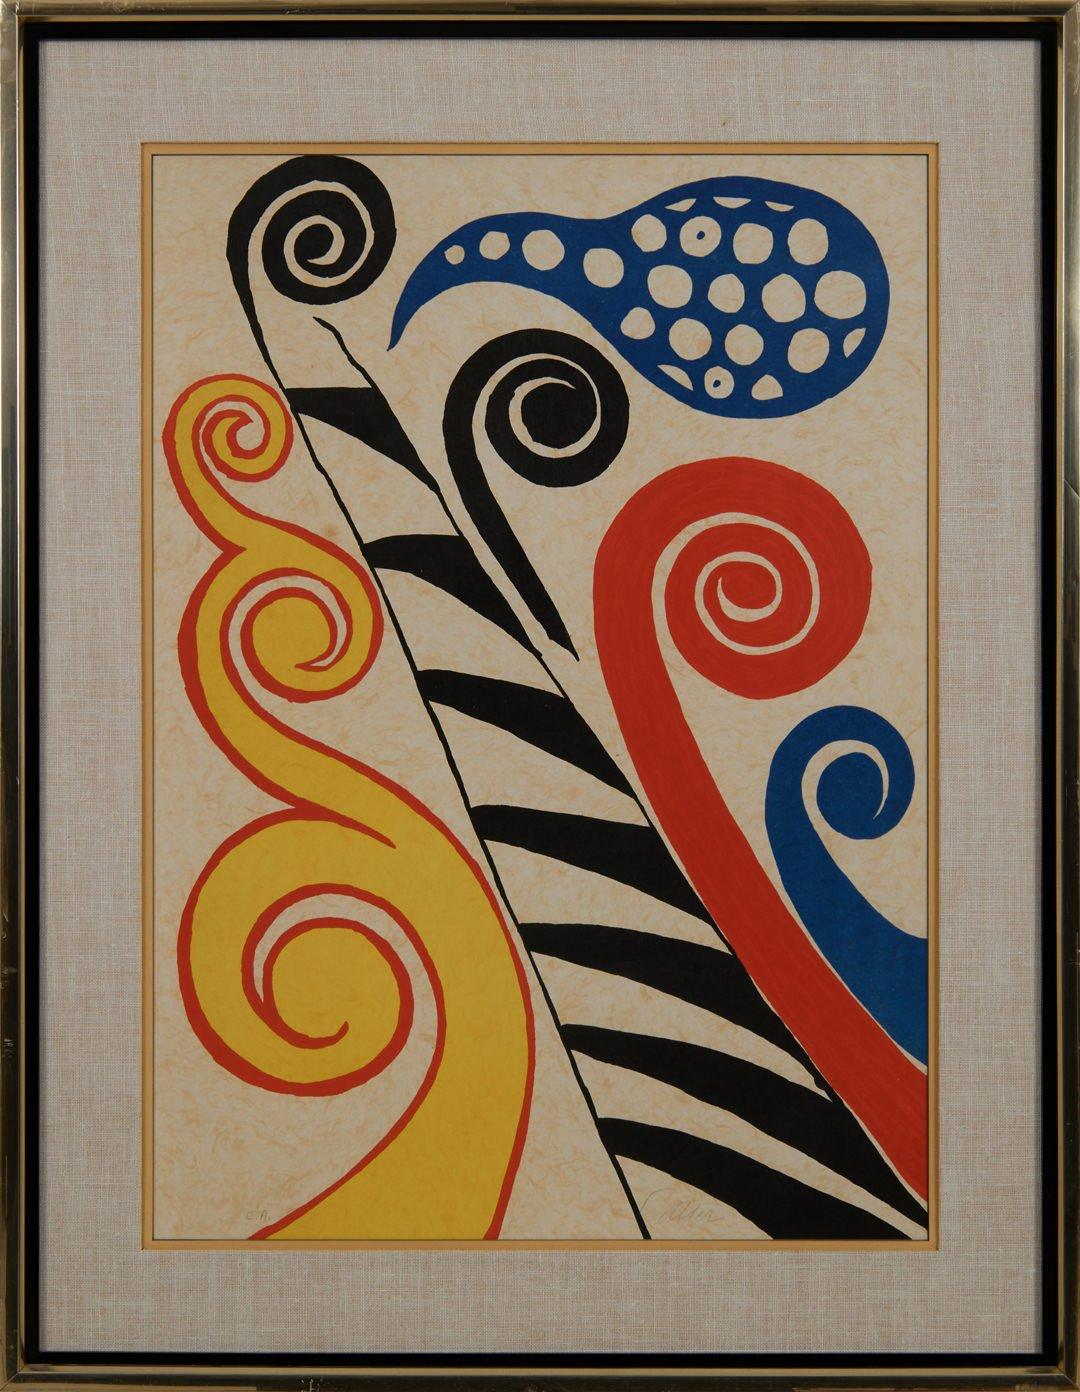 Fiesta, c. 1973, red, yellow & blue figurative abstract lithograph - Print by Alexander Calder